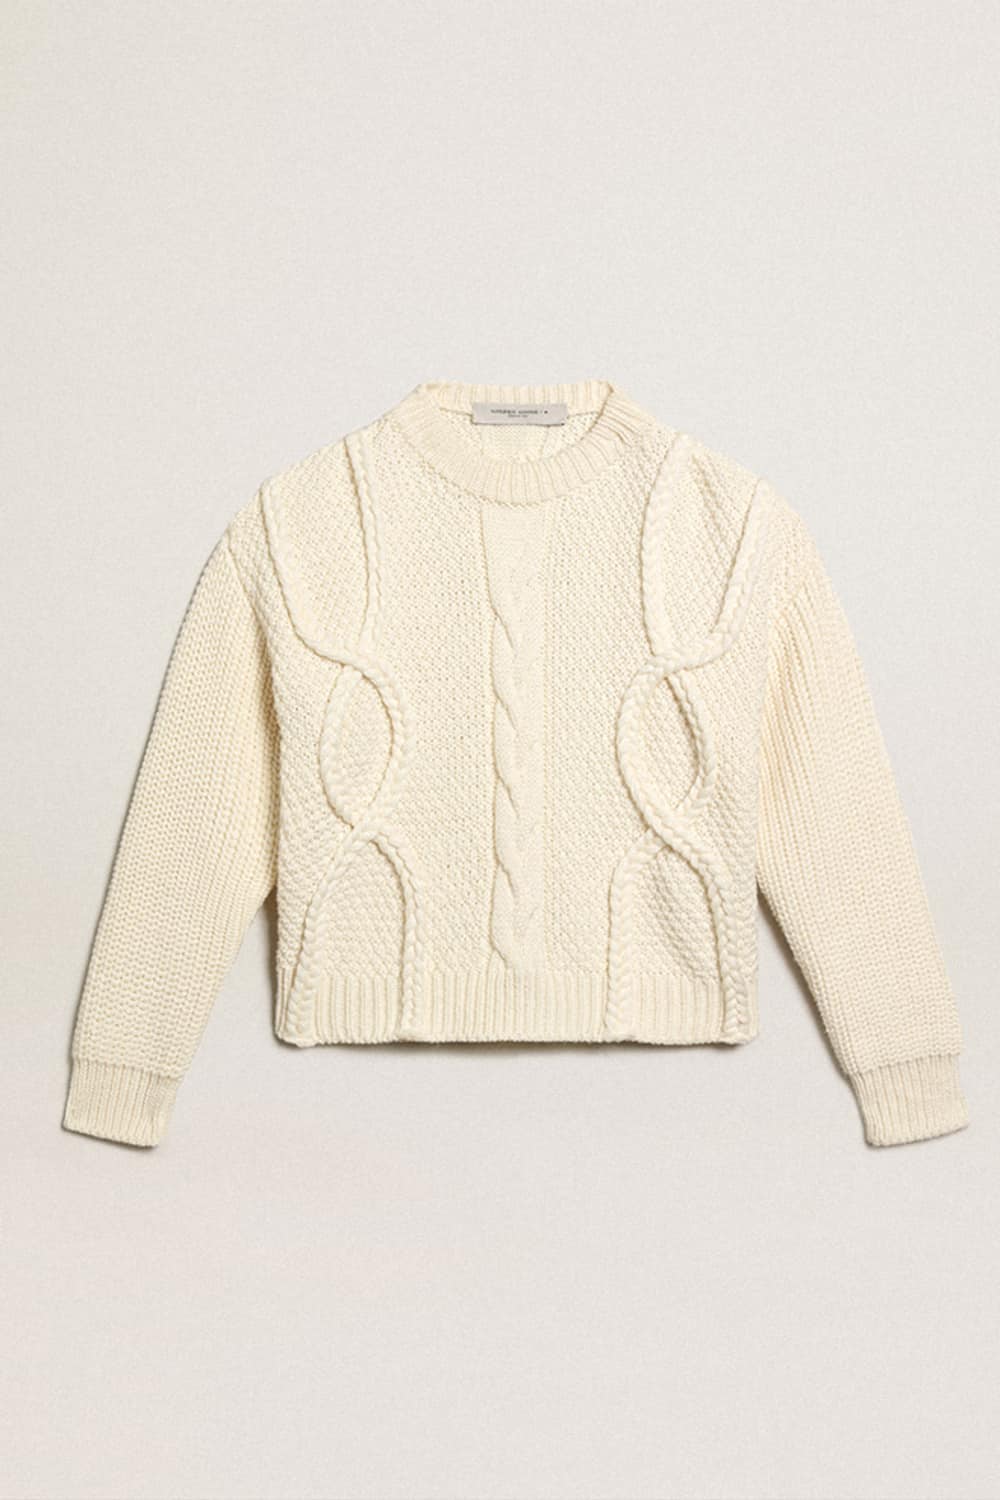 Golden Goose - Women's round-neck sweater in wool with braided motif in 